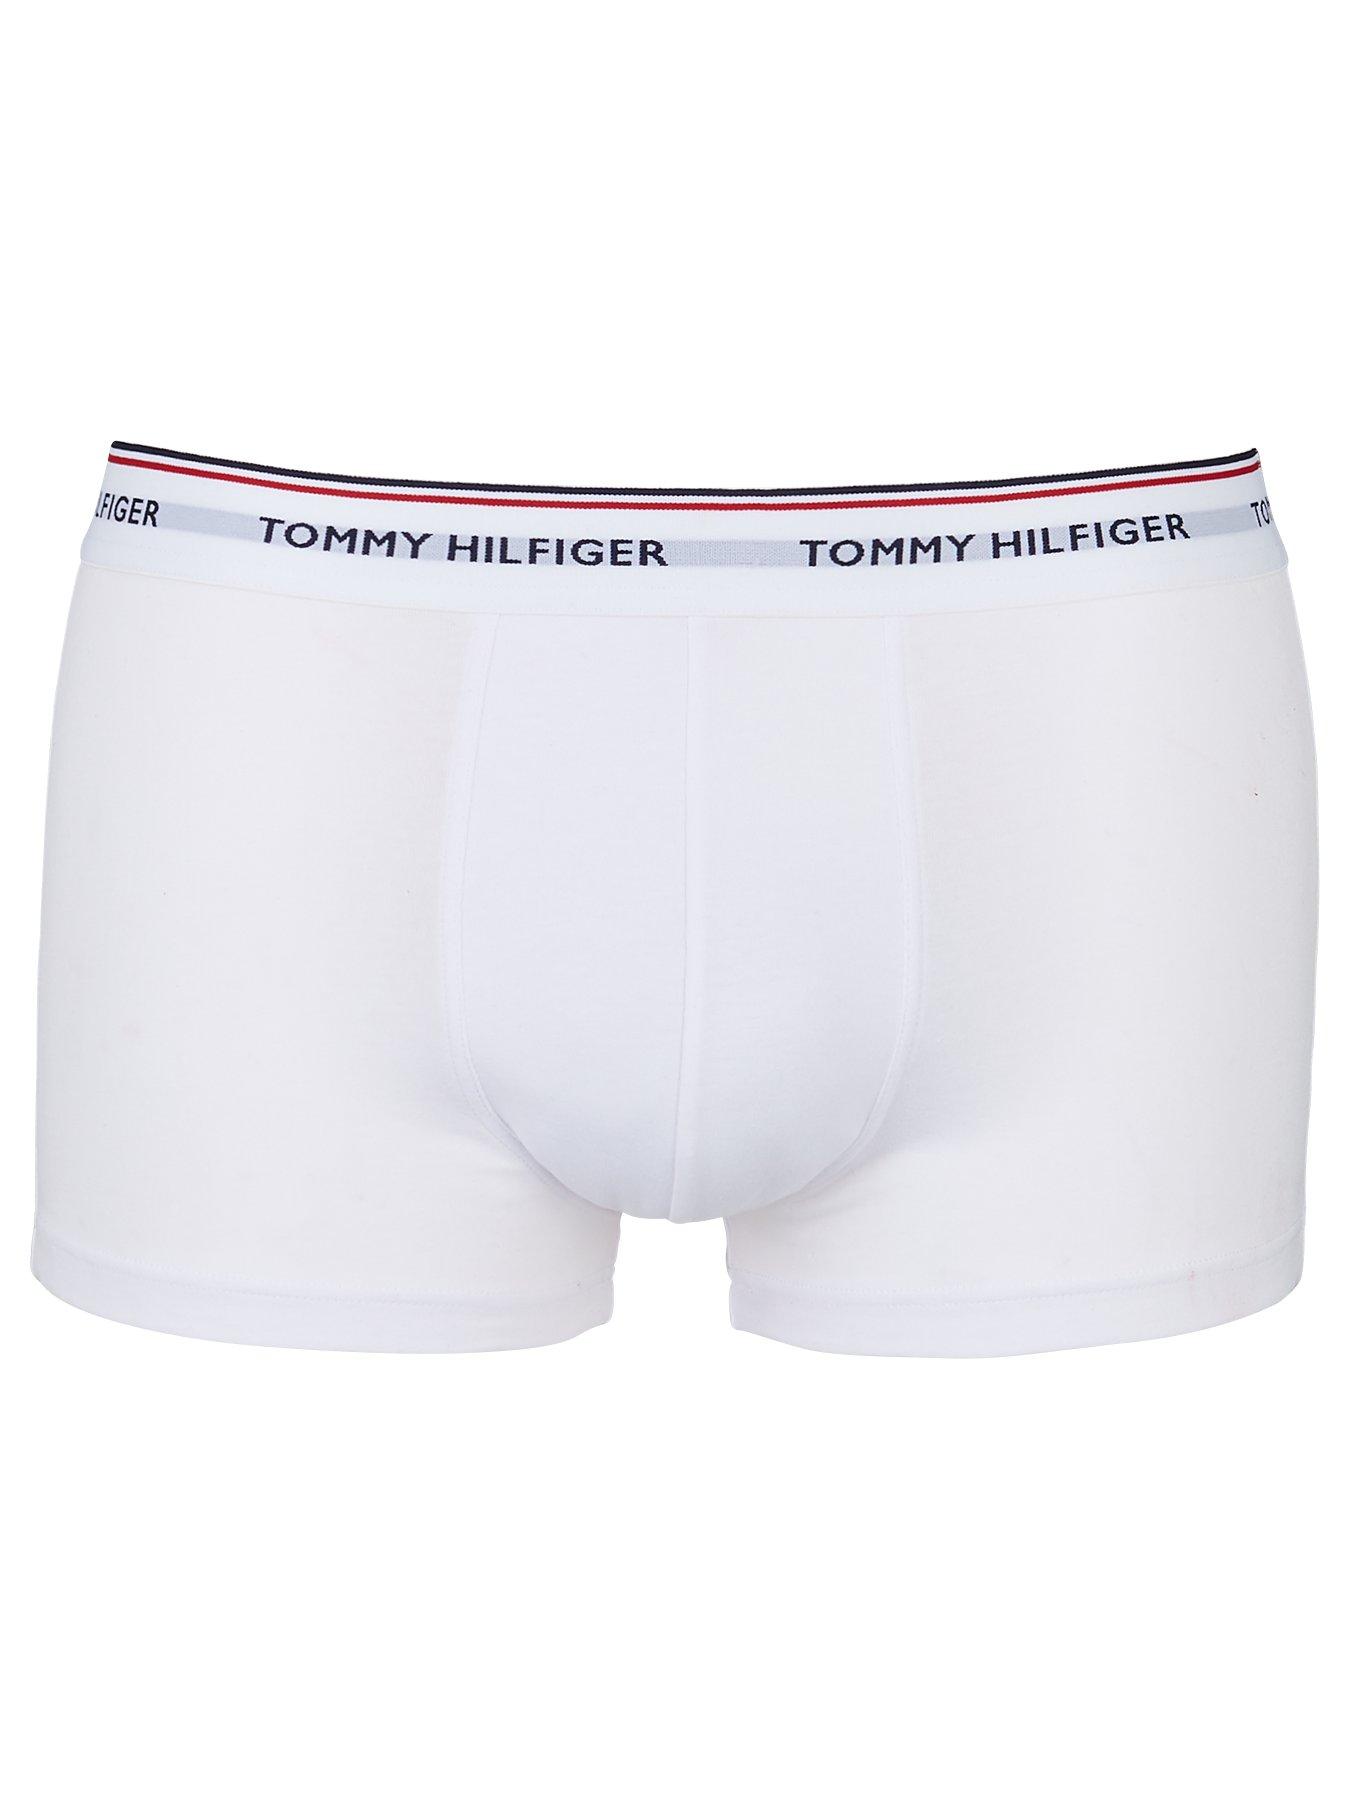 Tommy Hilfiger Three Pack Hipster Trunks - White | very.co.uk